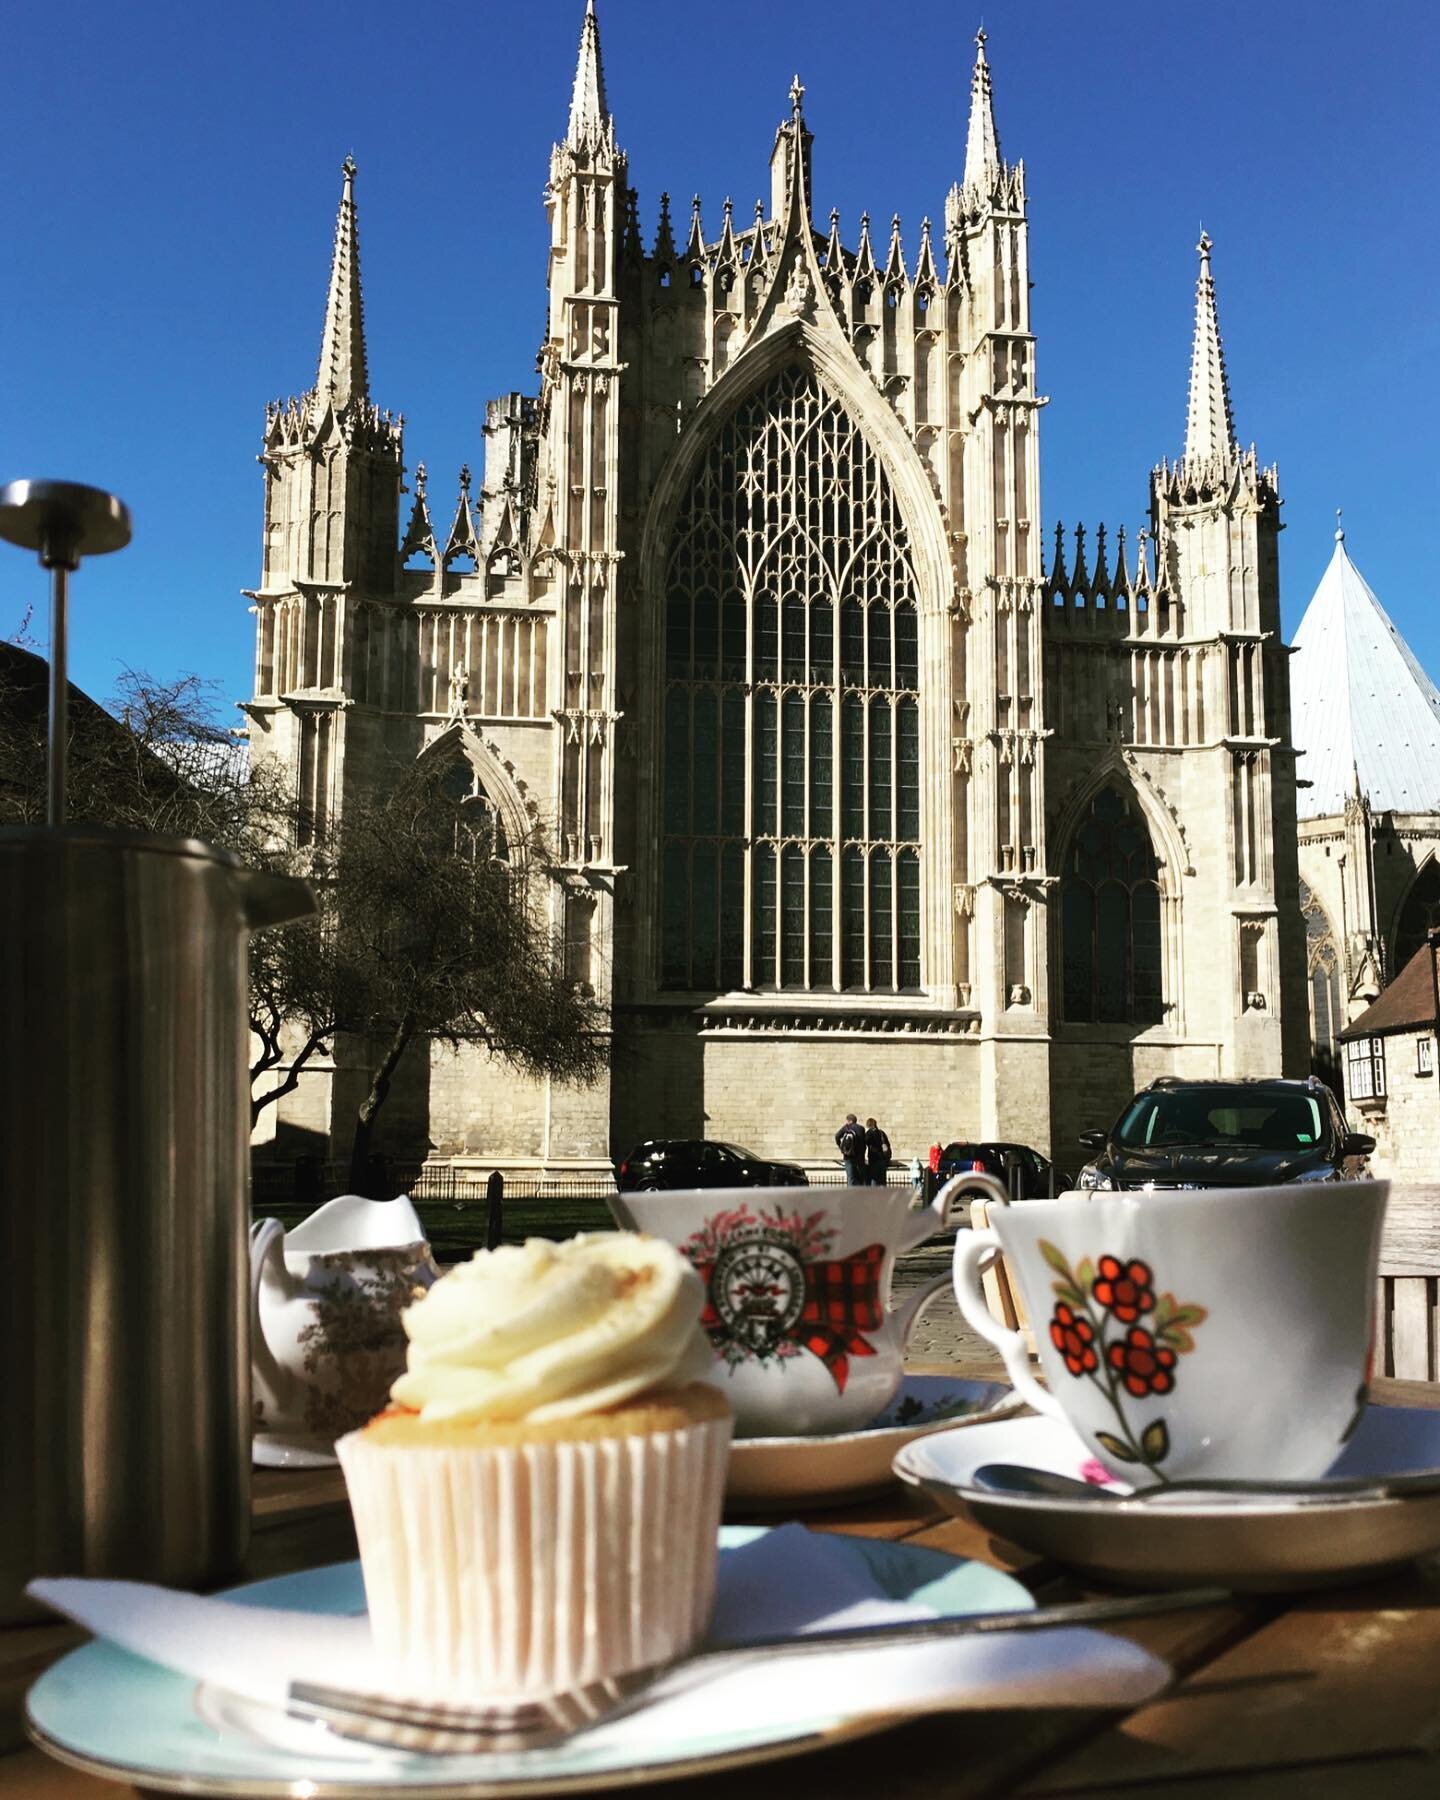 What&rsquo;s your favourite thing to do in York? 💙 We can&rsquo;t resist coffee + cake with a side of those Minster views at @crumbscupcakeryyork #madeinyork #loveyork 

#harvestmoonsnacks #lovelocal #madeinyorkshire #yorkindie #thisisyork #yorkmins